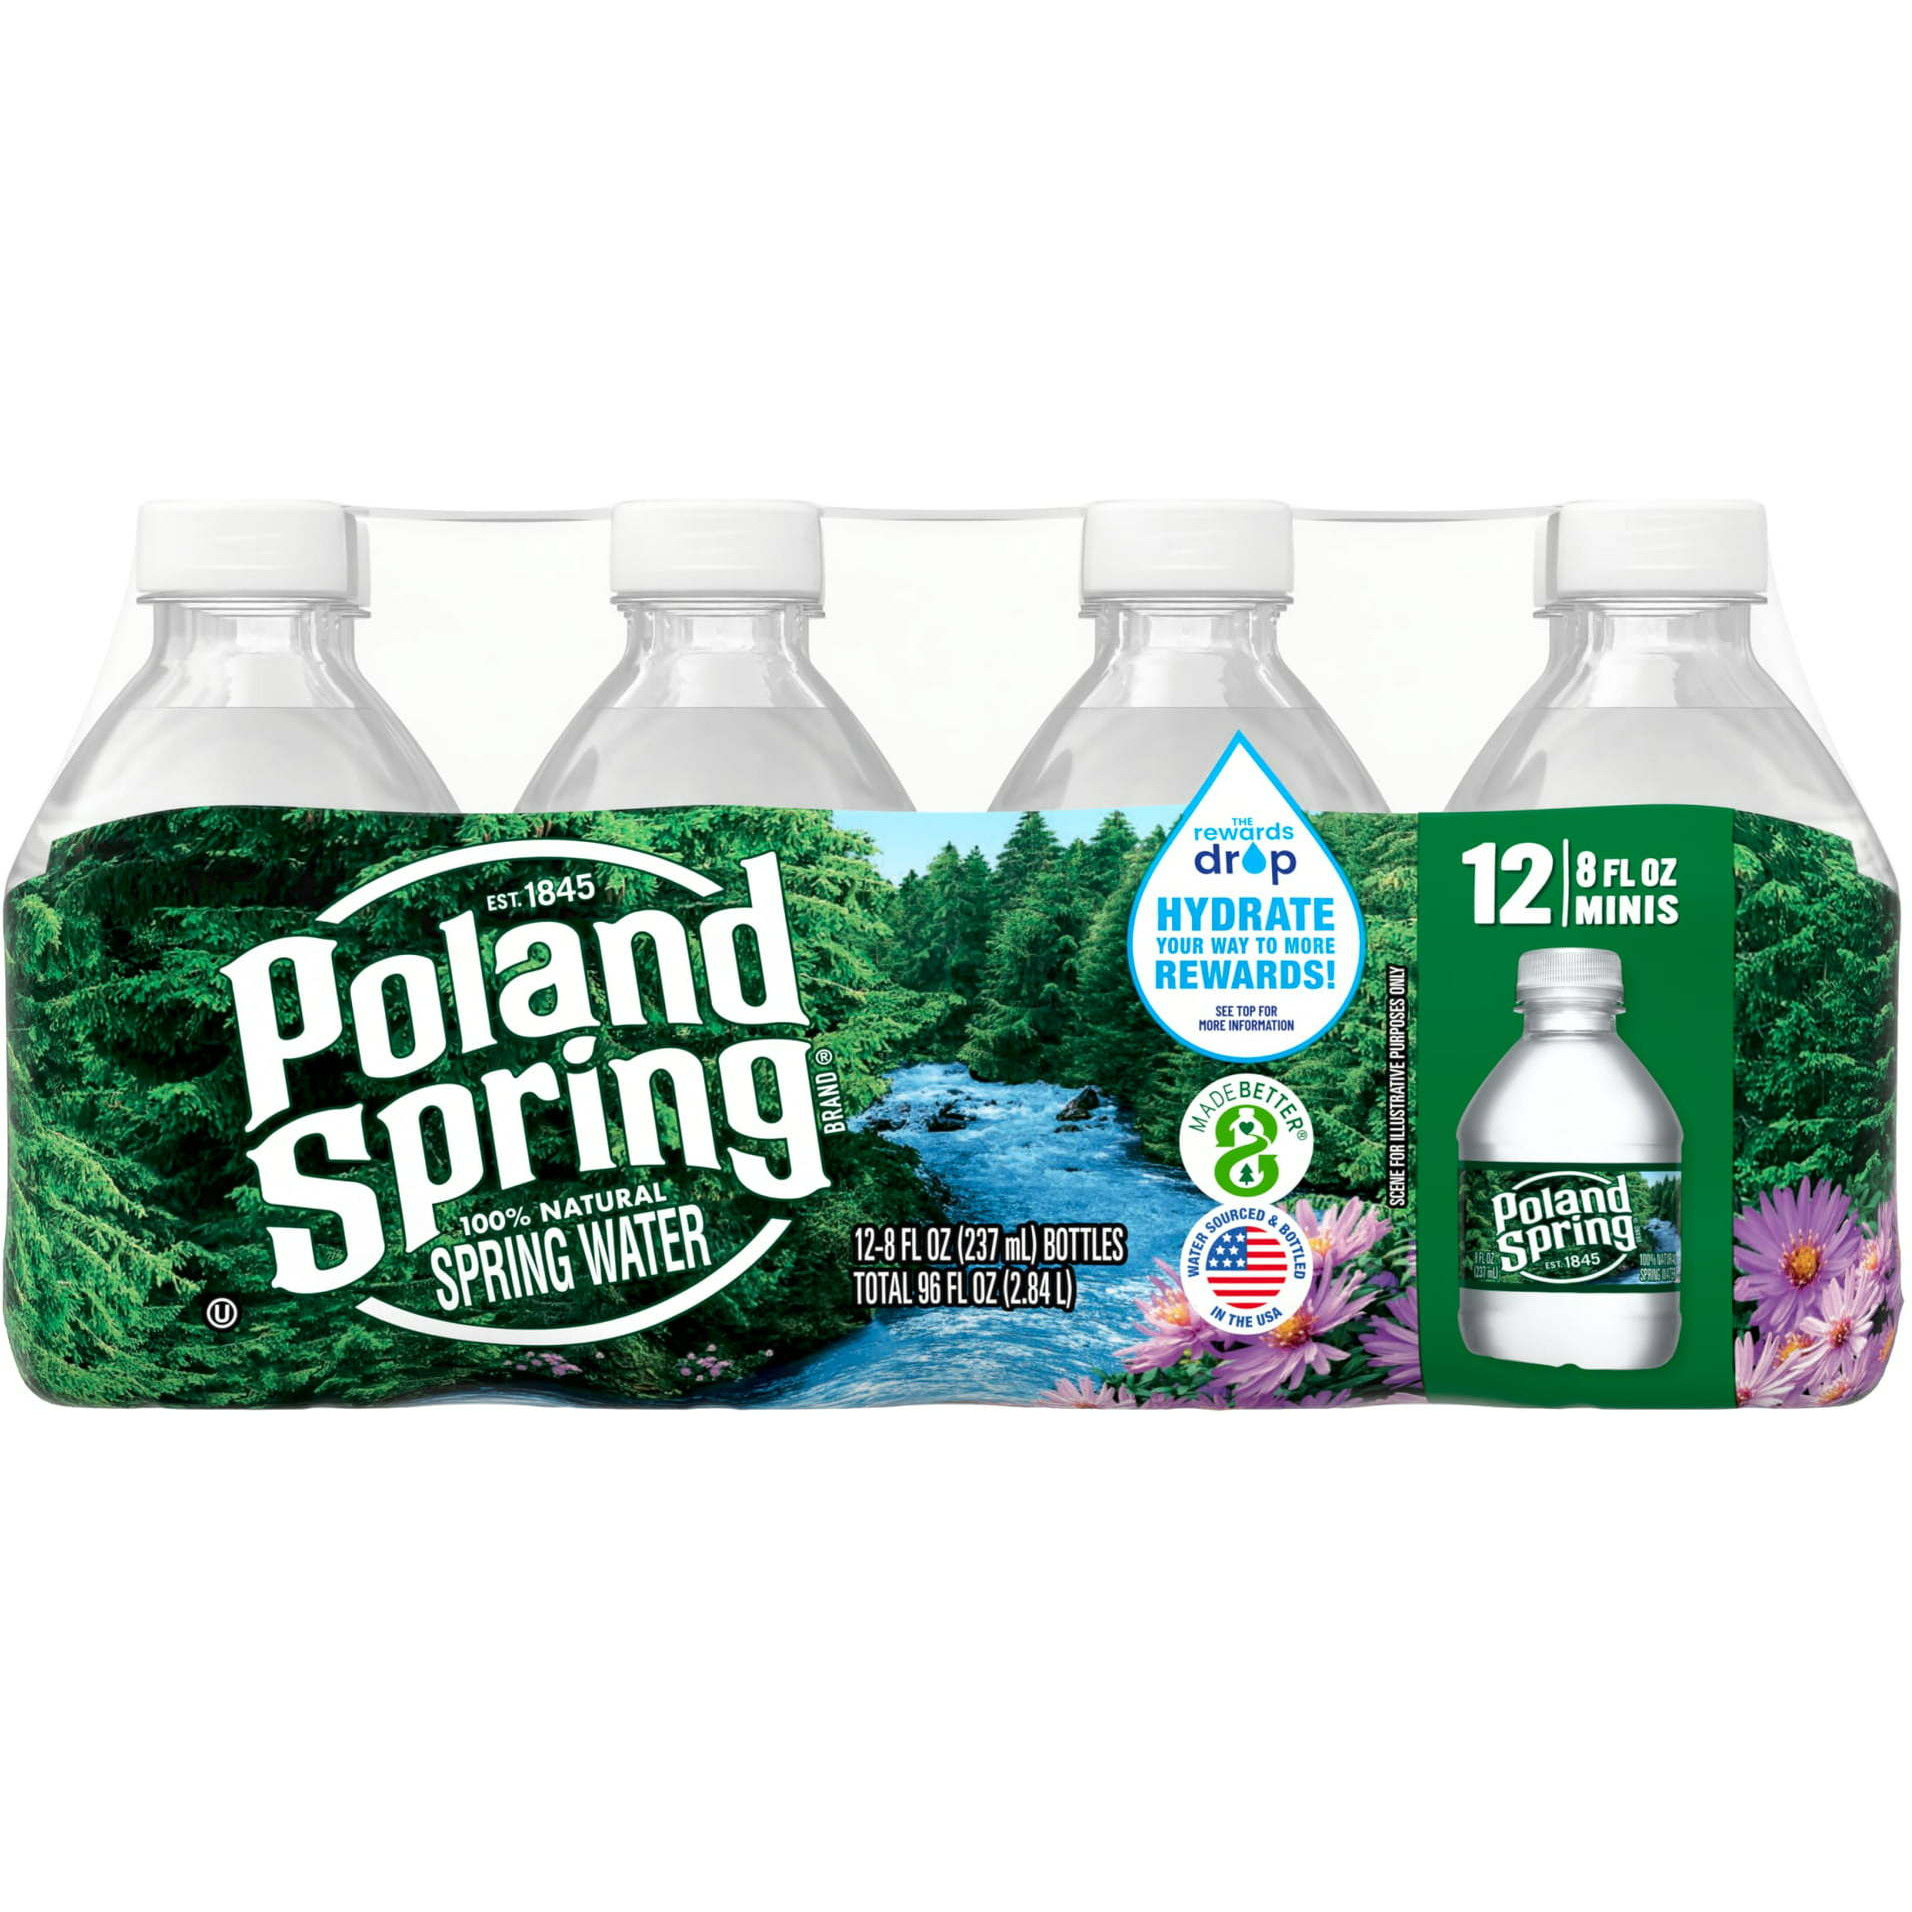 Case of 4 - Poland Spring Natural Water 12 Pack - 8 Oz [50% Off]